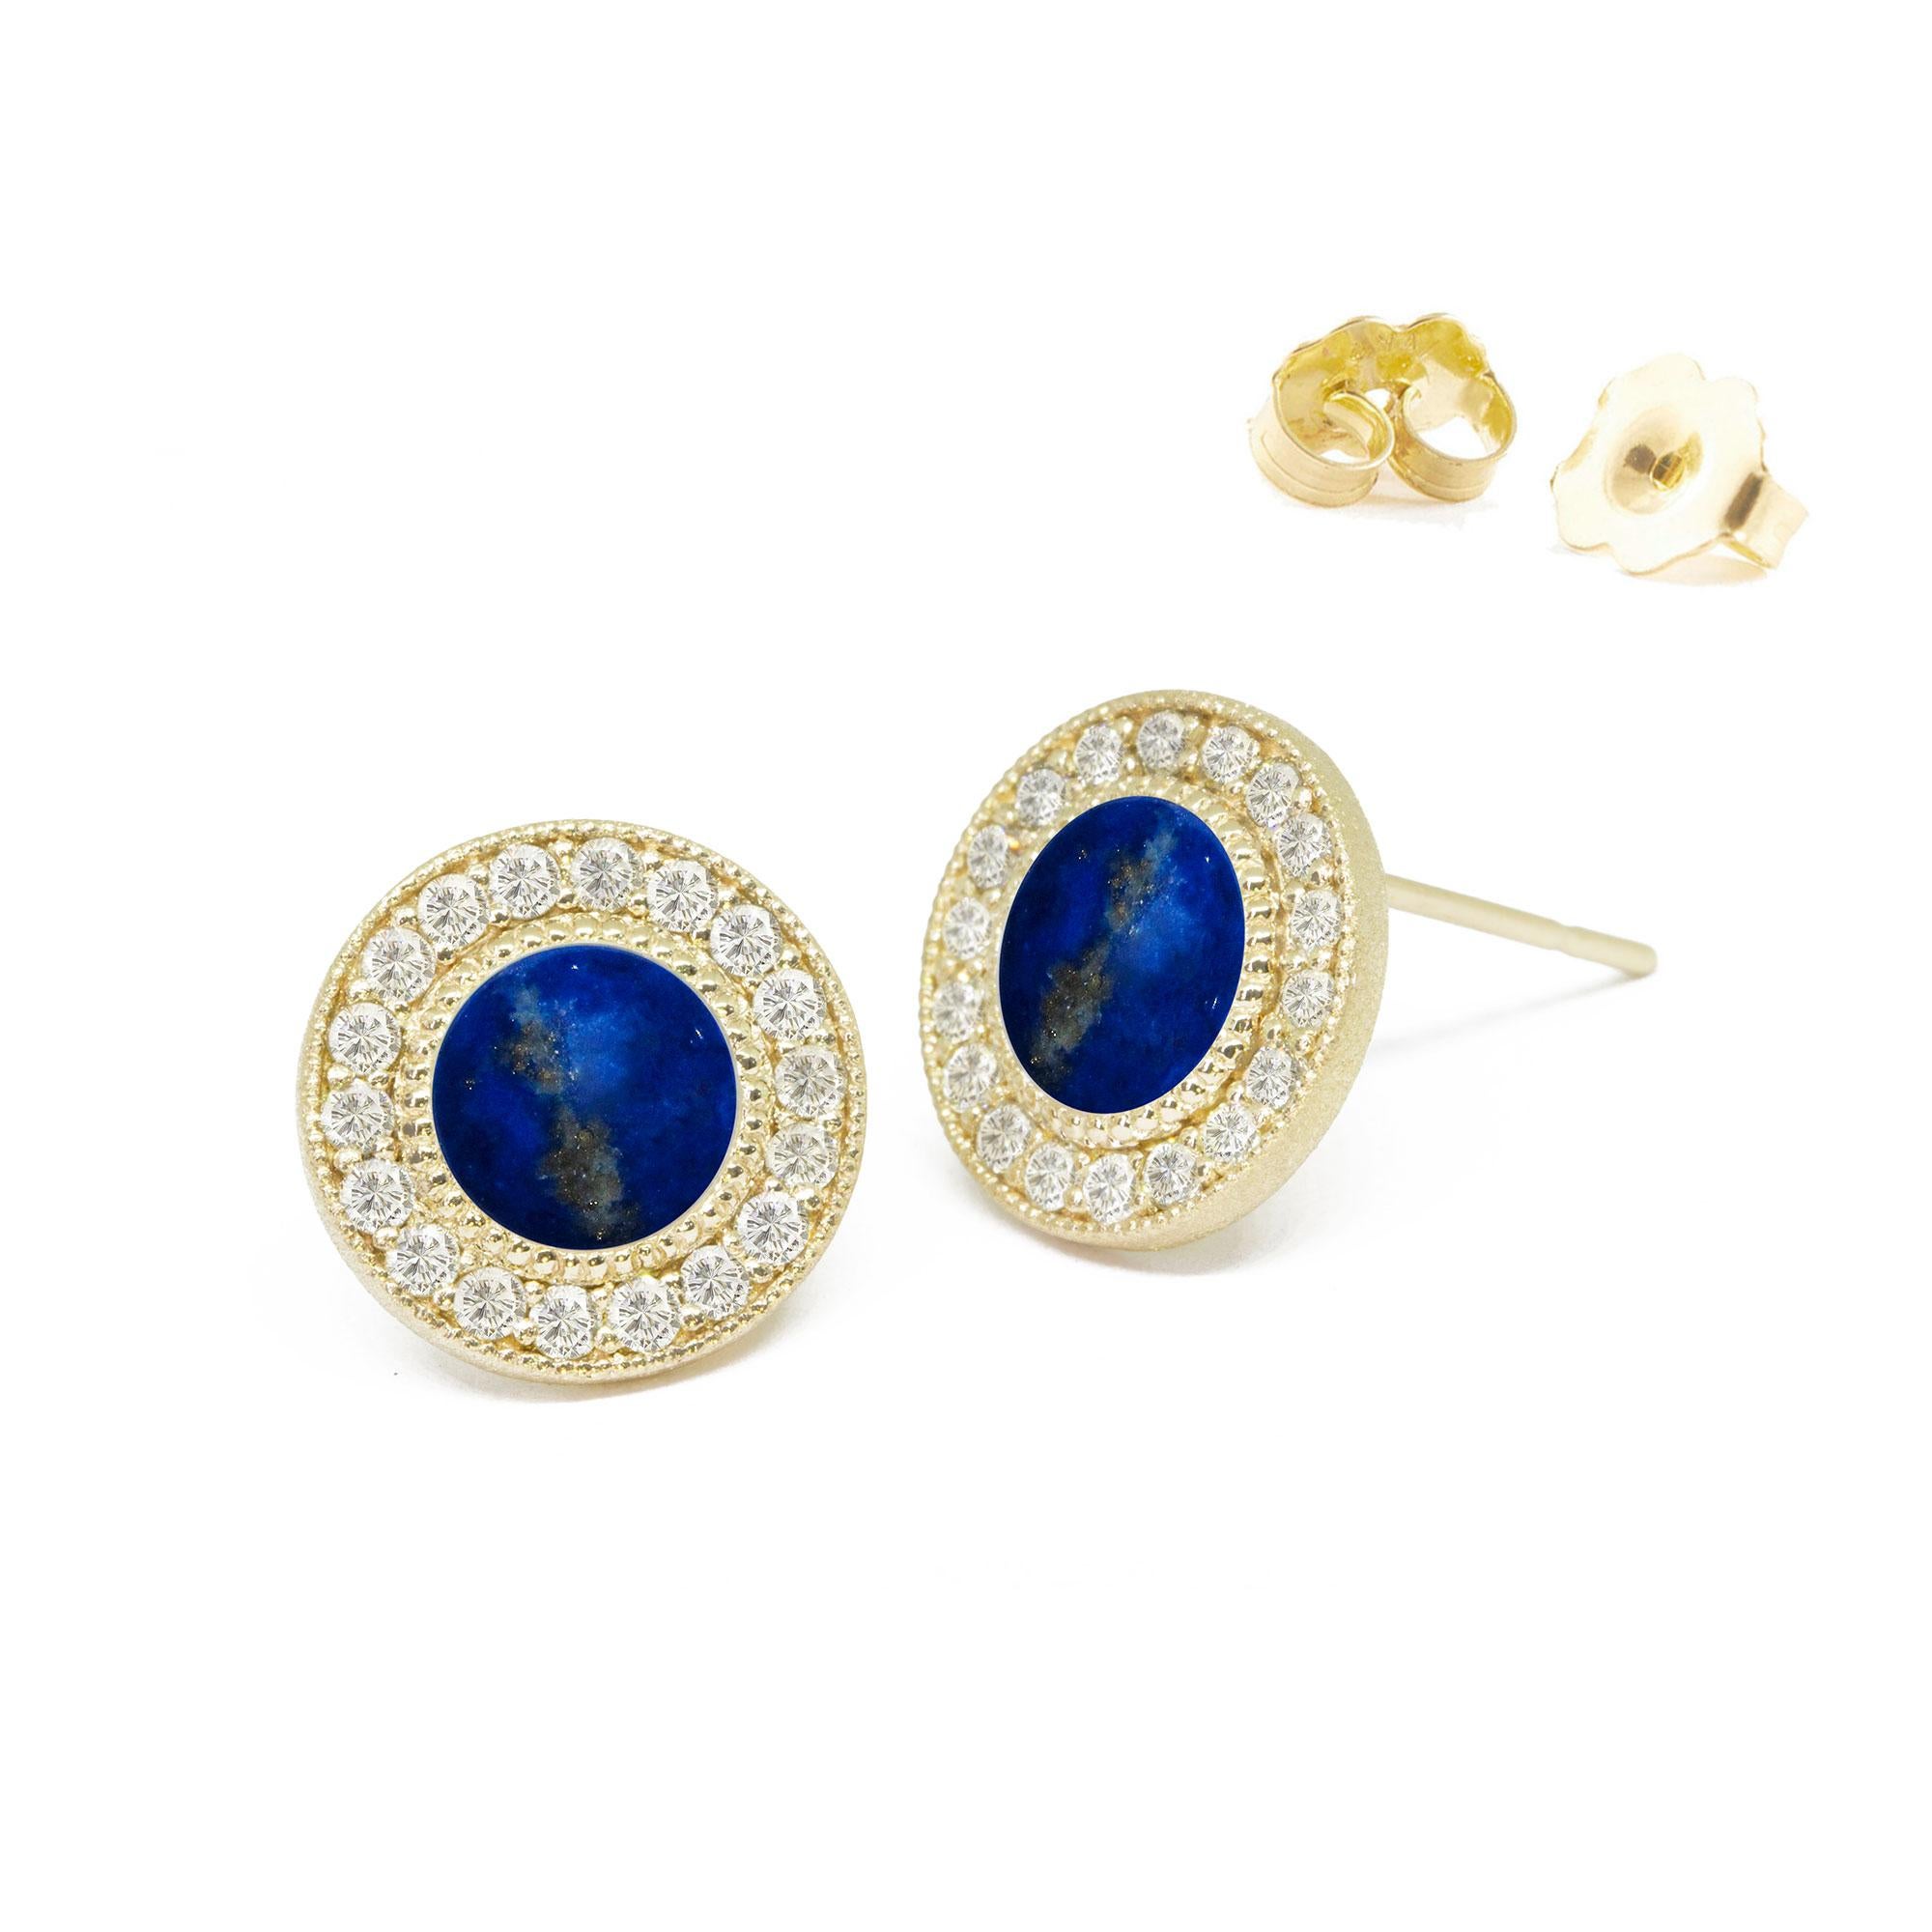 Designed with concentric circles of engraved gold and pavé diamonds surrounding lapis cabochons, the Diamond Orbit Gold Studs elevate everyday looks with a cool mix of textures and lusters.

Nina Nguyen Design's patent-pending earrings have an